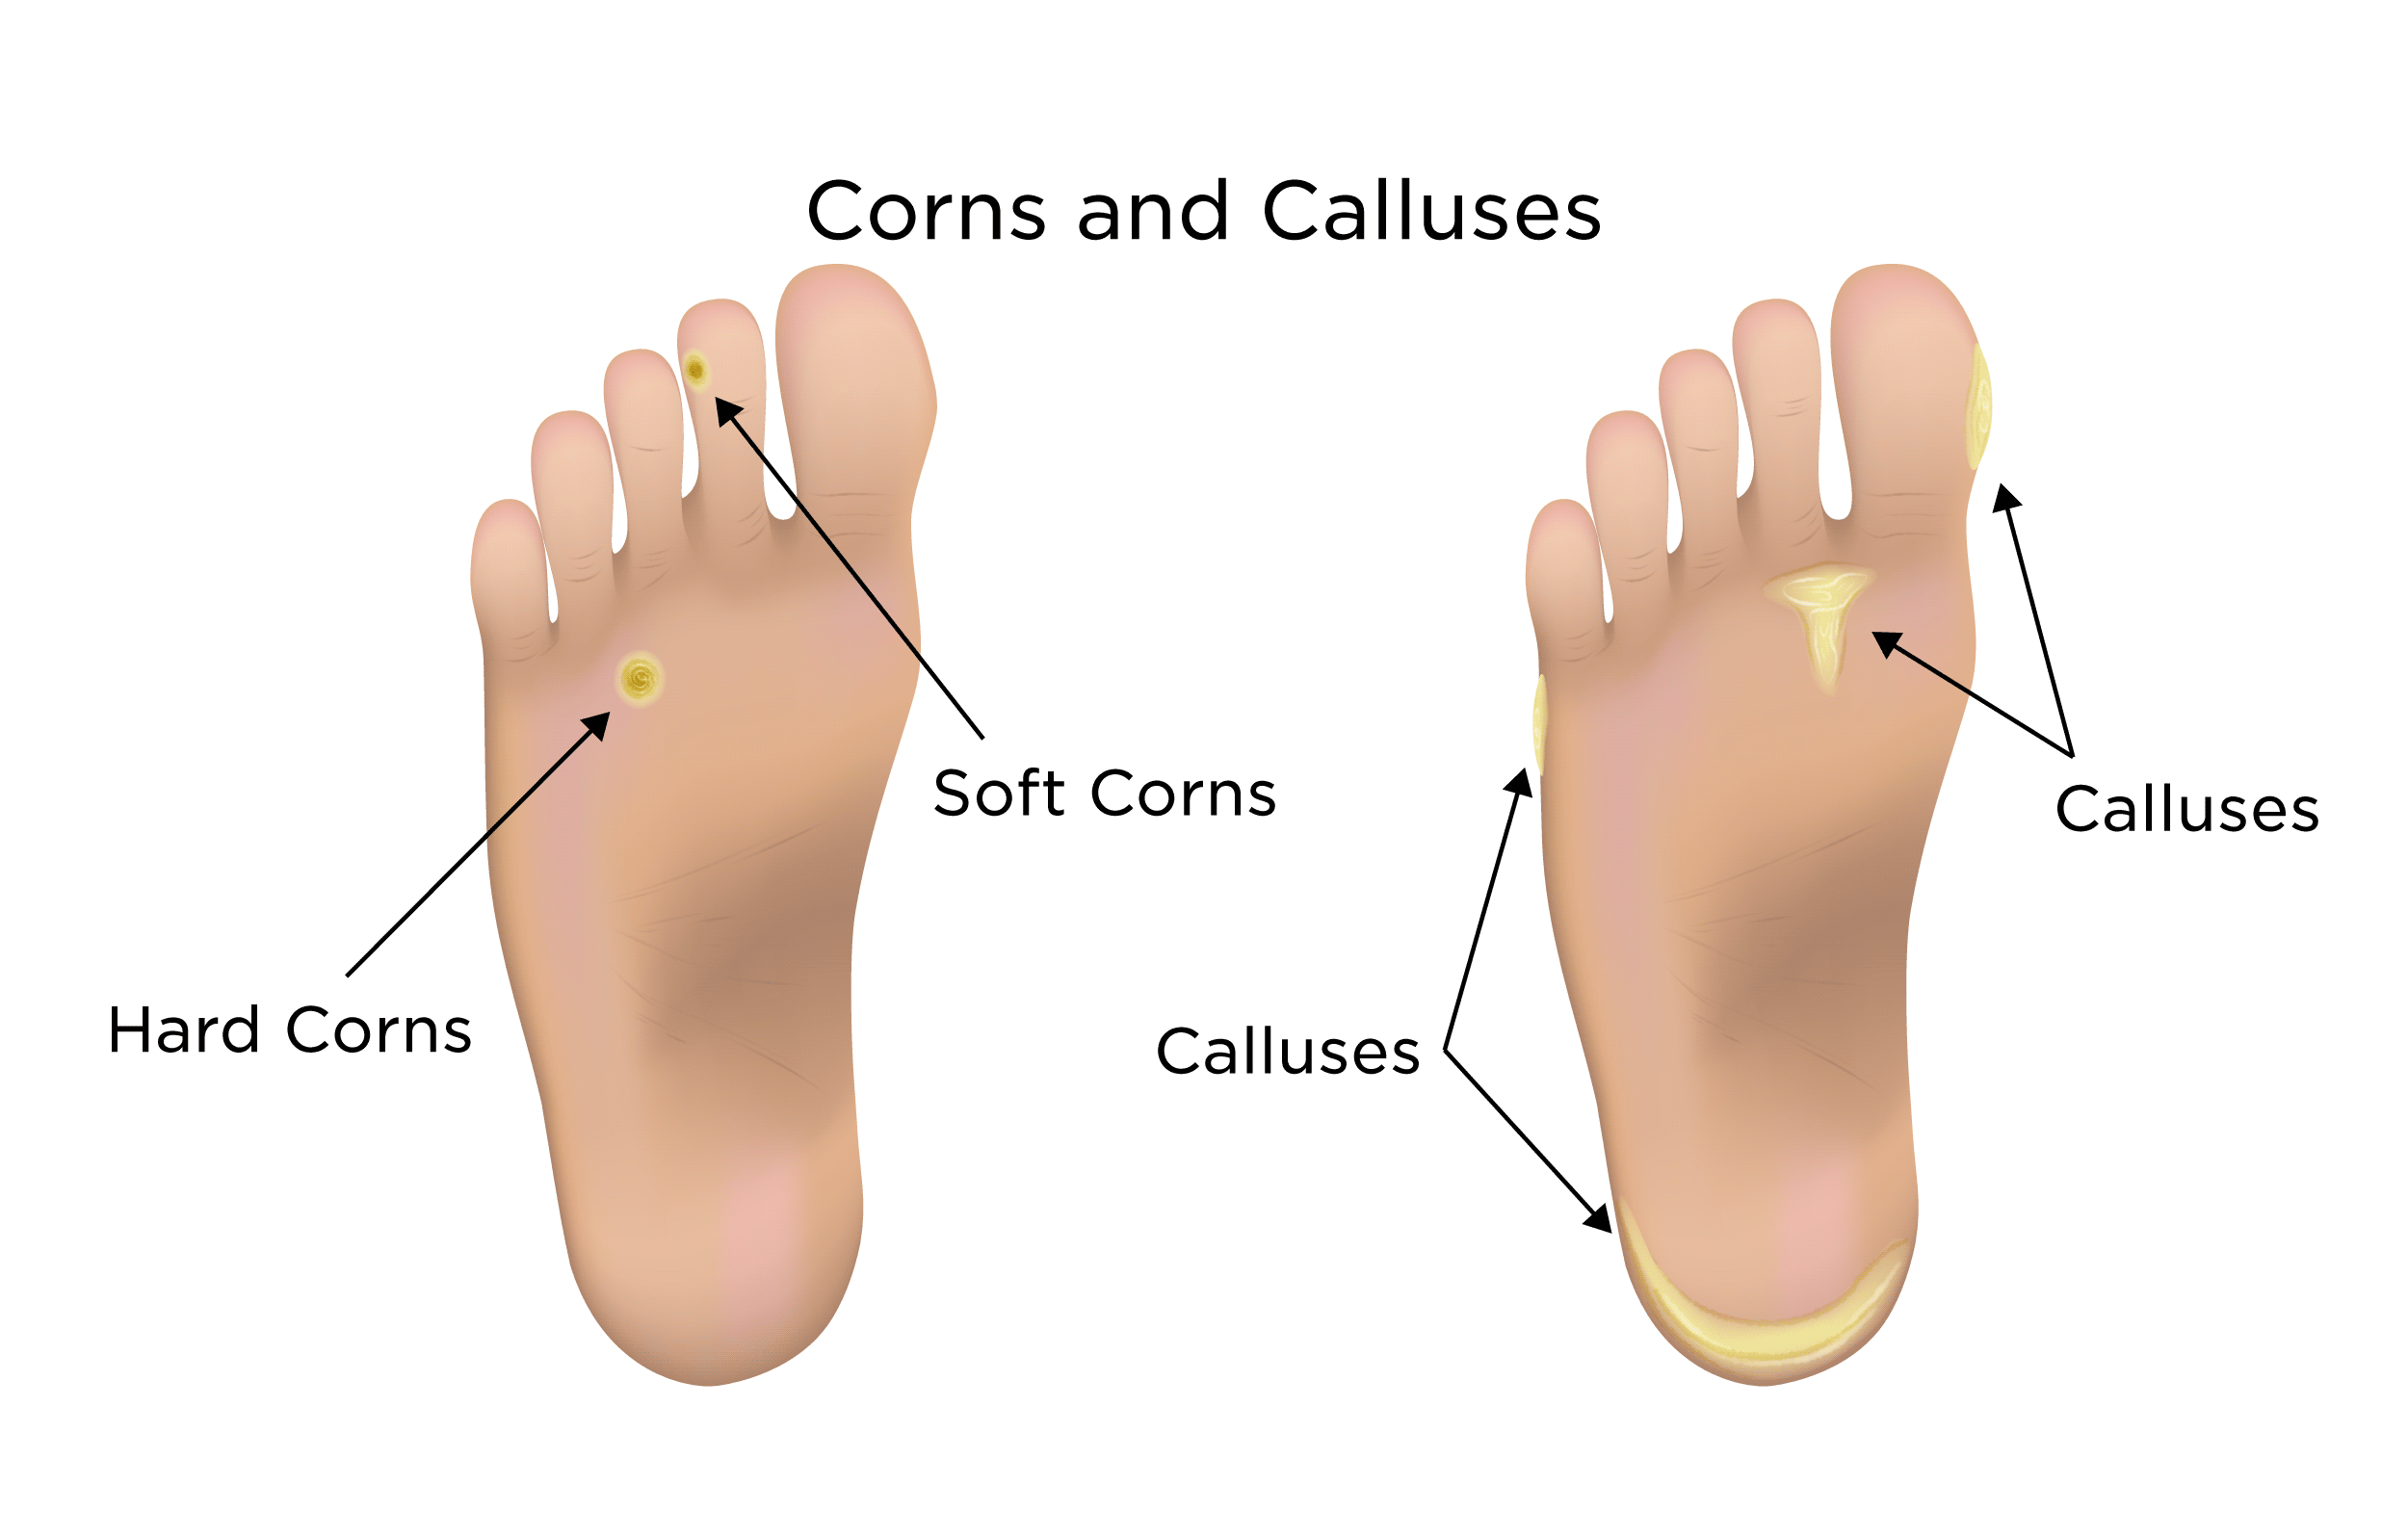 How to Take Care of Your Calluses